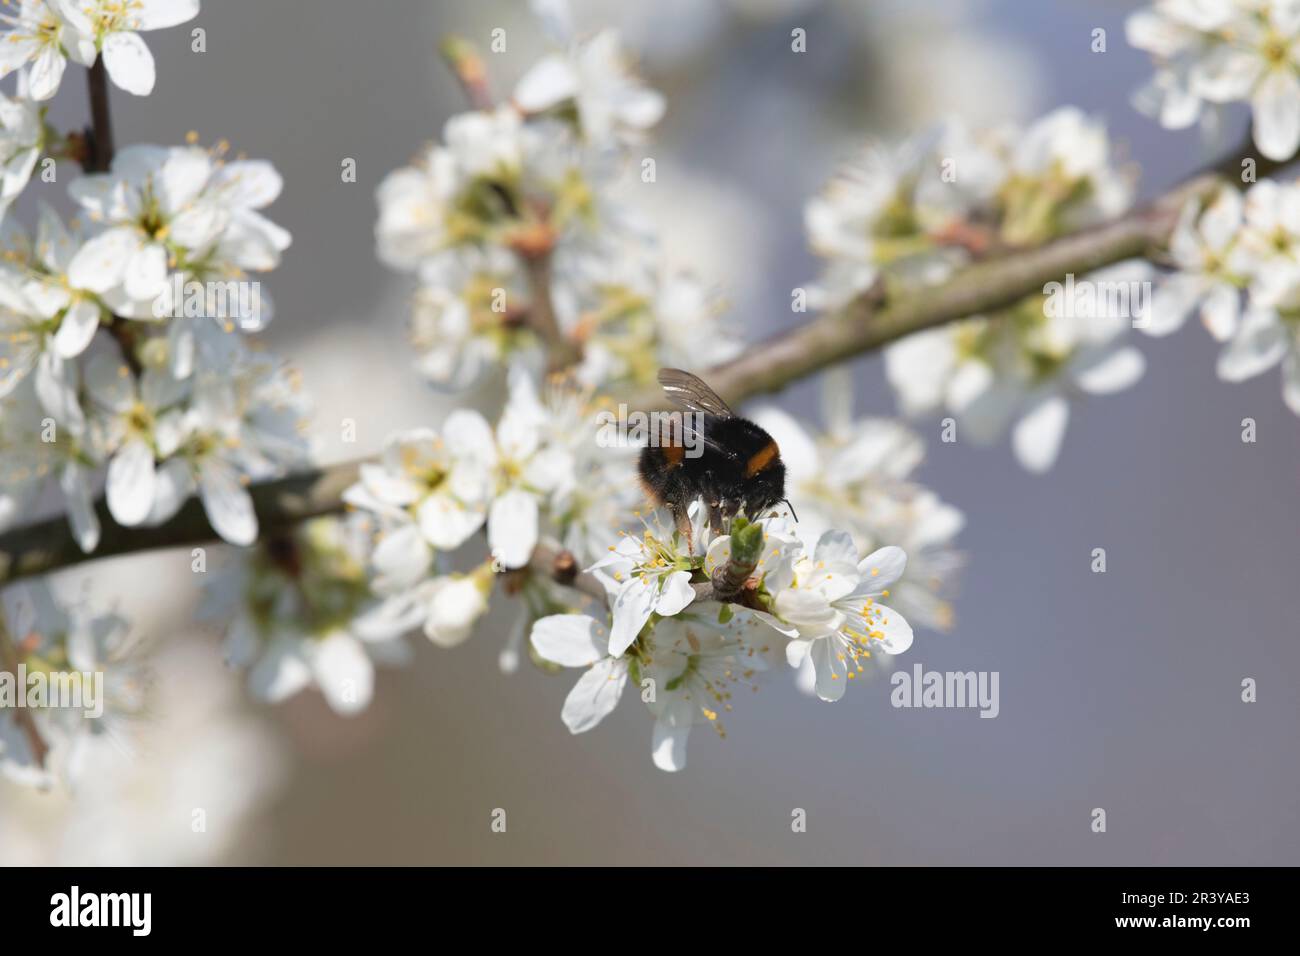 A Buff-tailed Bumblebee (Bombus Terrestris) Foraging on the Flowers of a Damson Fruit Tree (Prunus Insititia) in Spring Sunshine Stock Photo